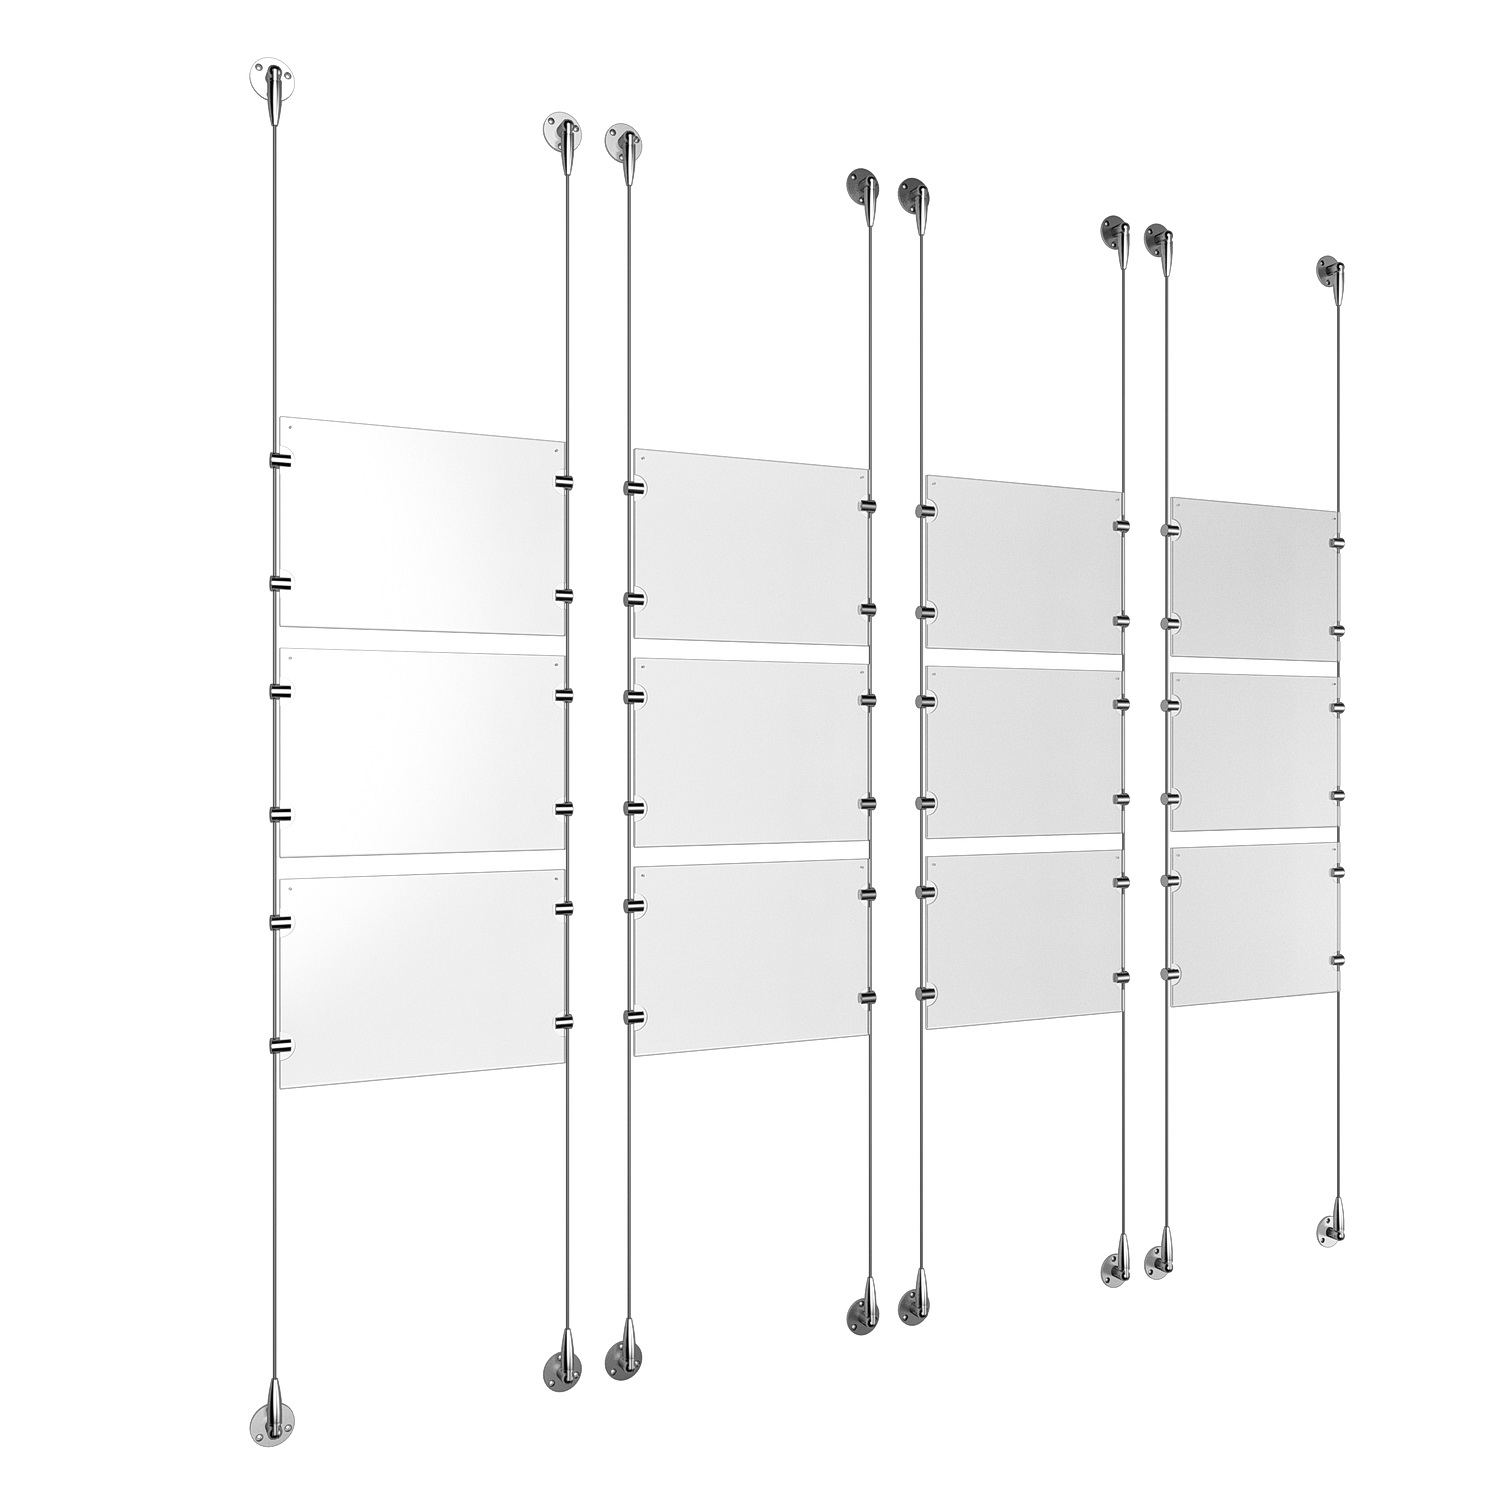 (12) 11'' Width x 8-1/2'' Height Clear Acrylic Frame & (8) Stainless Steel Satin Brushed Adjustable Angle Signature 1/8'' Cable Systems with (48) Single-Sided Panel Grippers